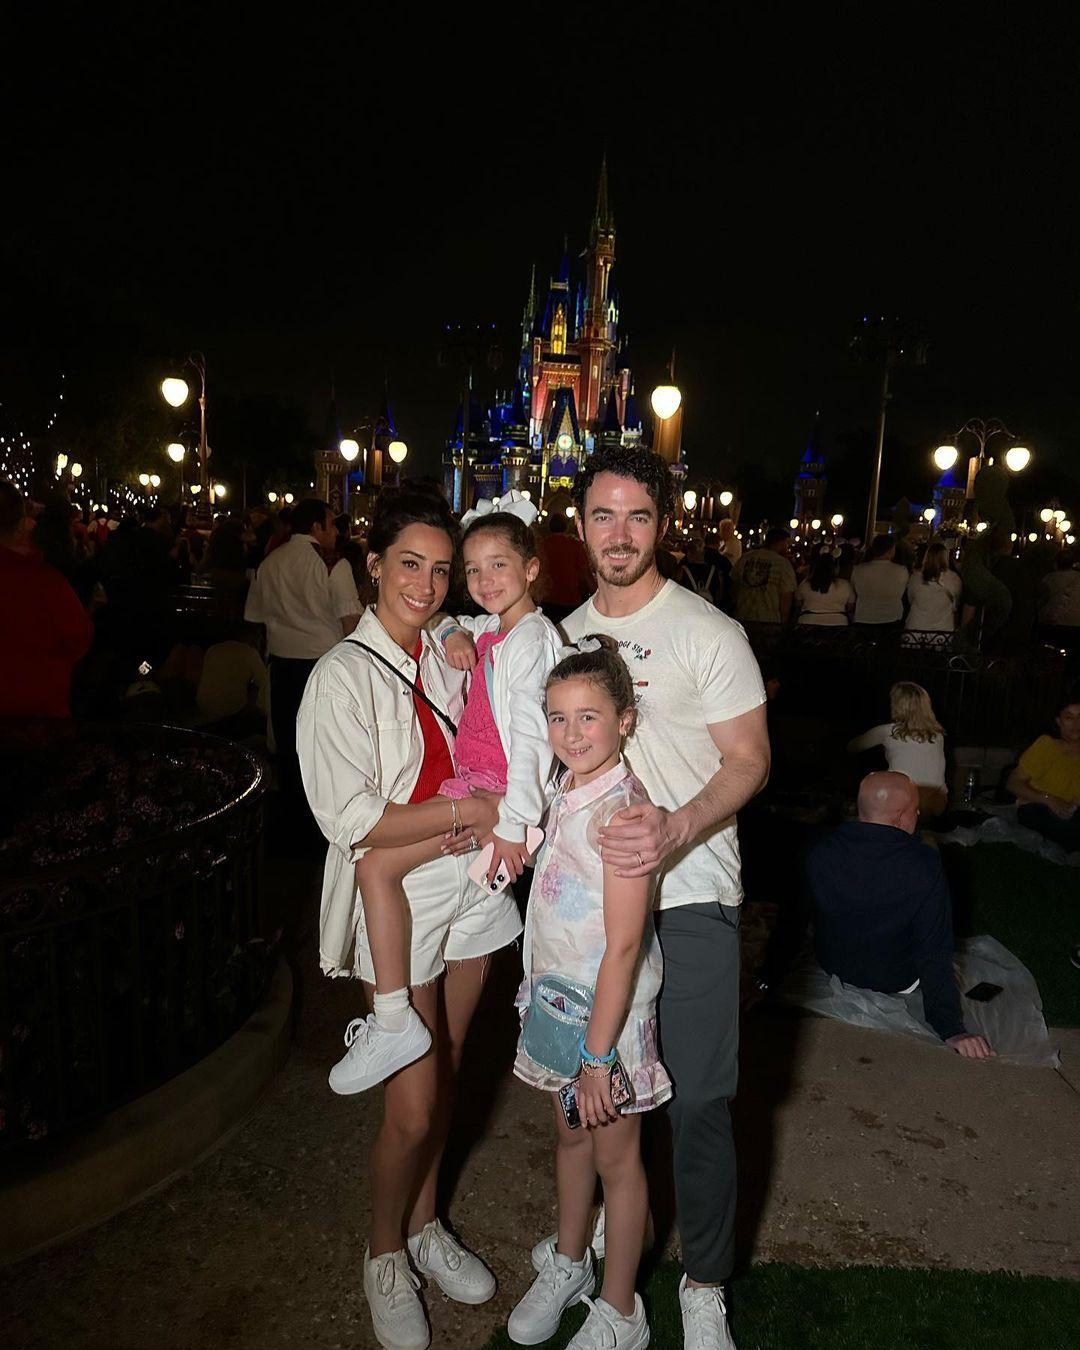 Jonas Brothers Member Kevin Jonas Spotted At Disney World With Family